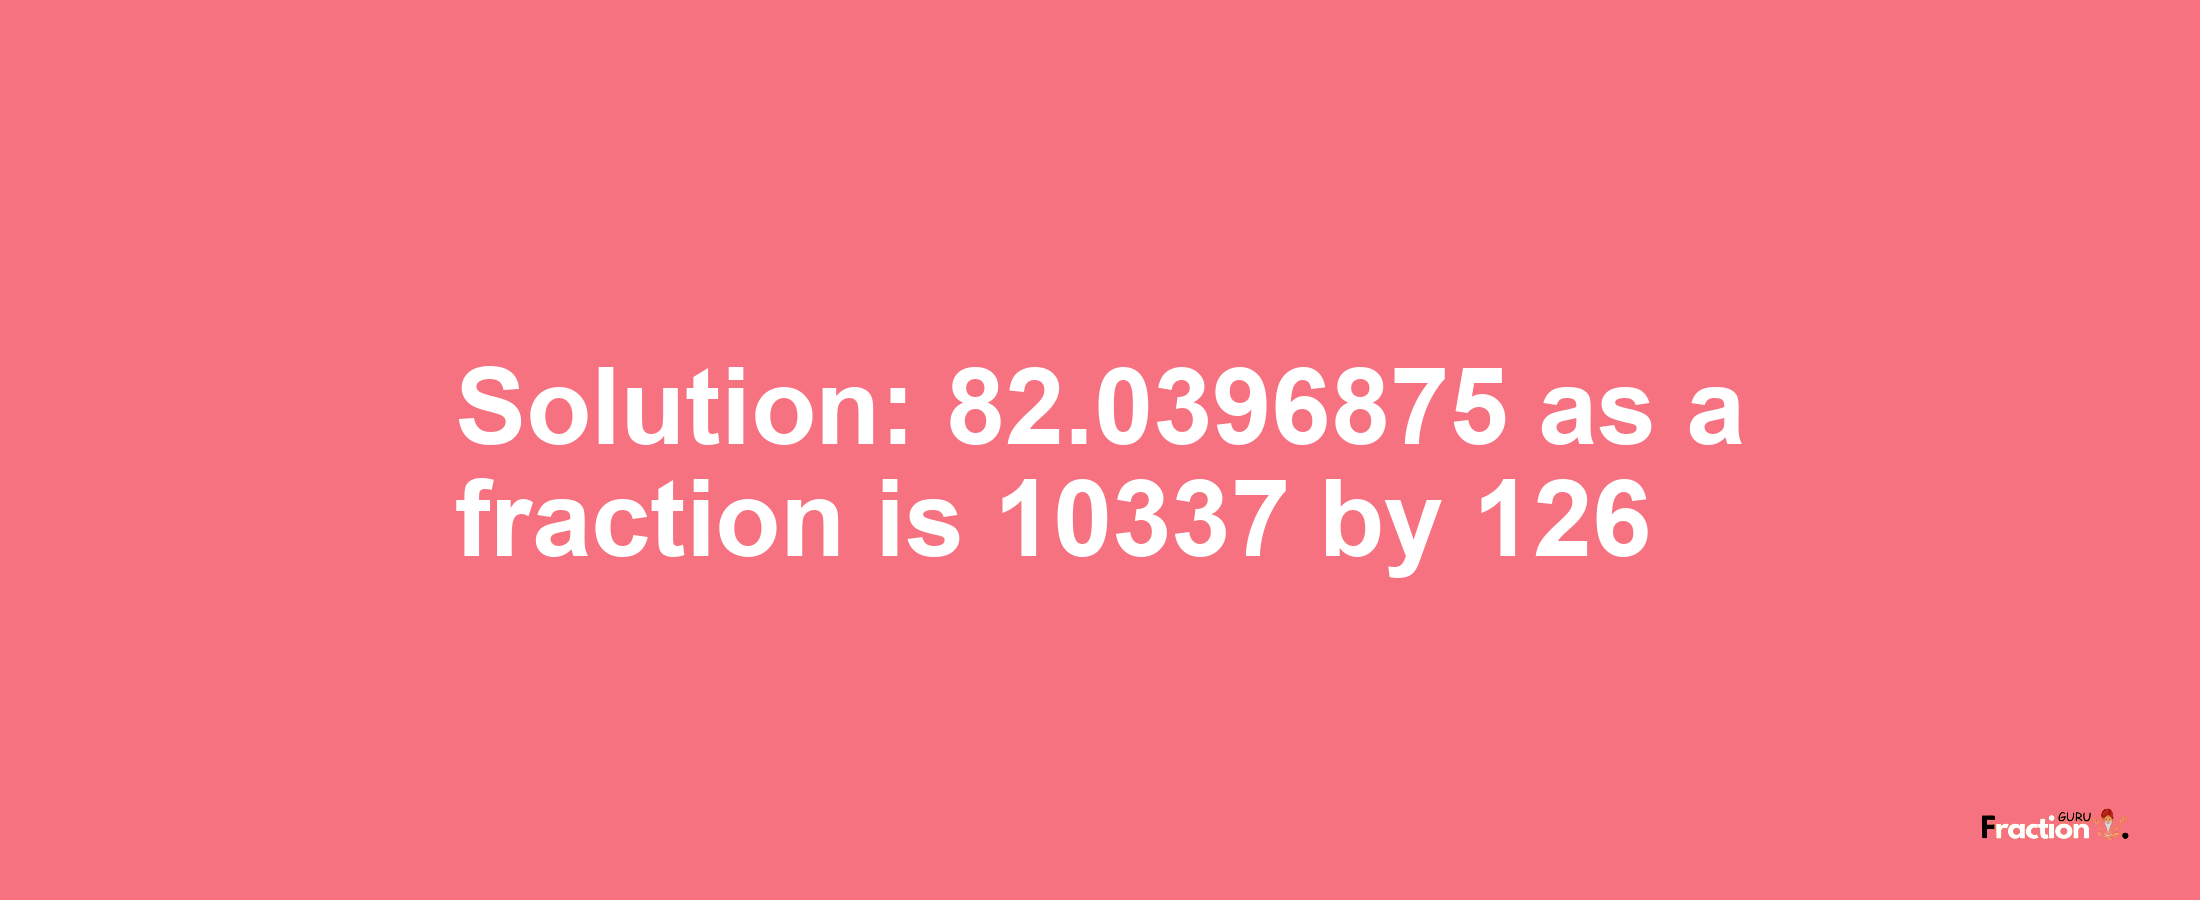 Solution:82.0396875 as a fraction is 10337/126